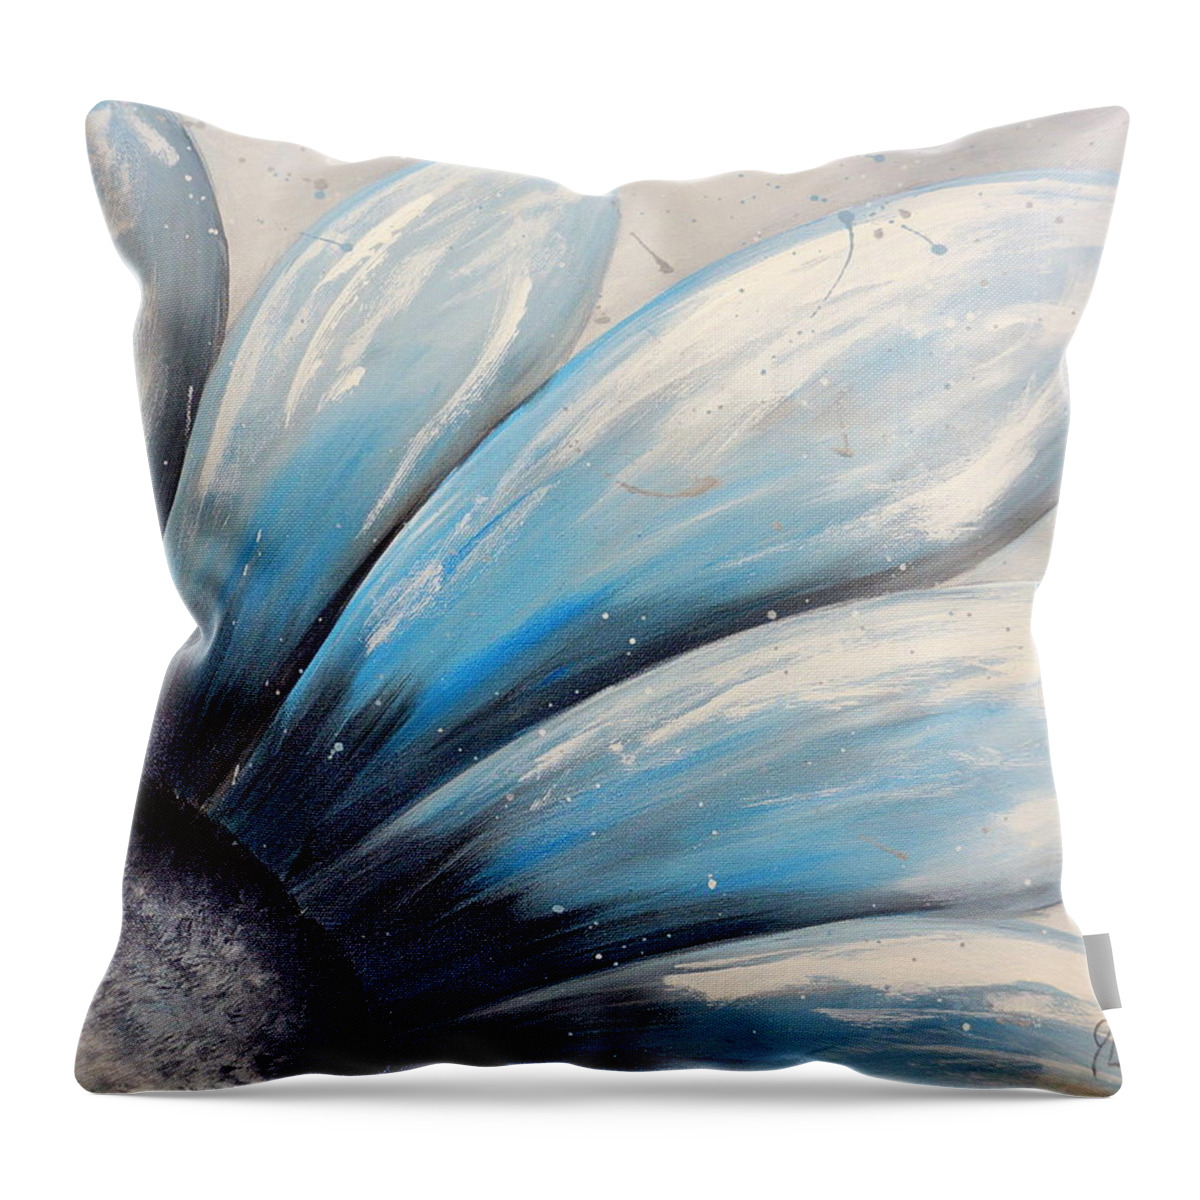 Flower Throw Pillow featuring the painting Blue Flower by Janette Legg